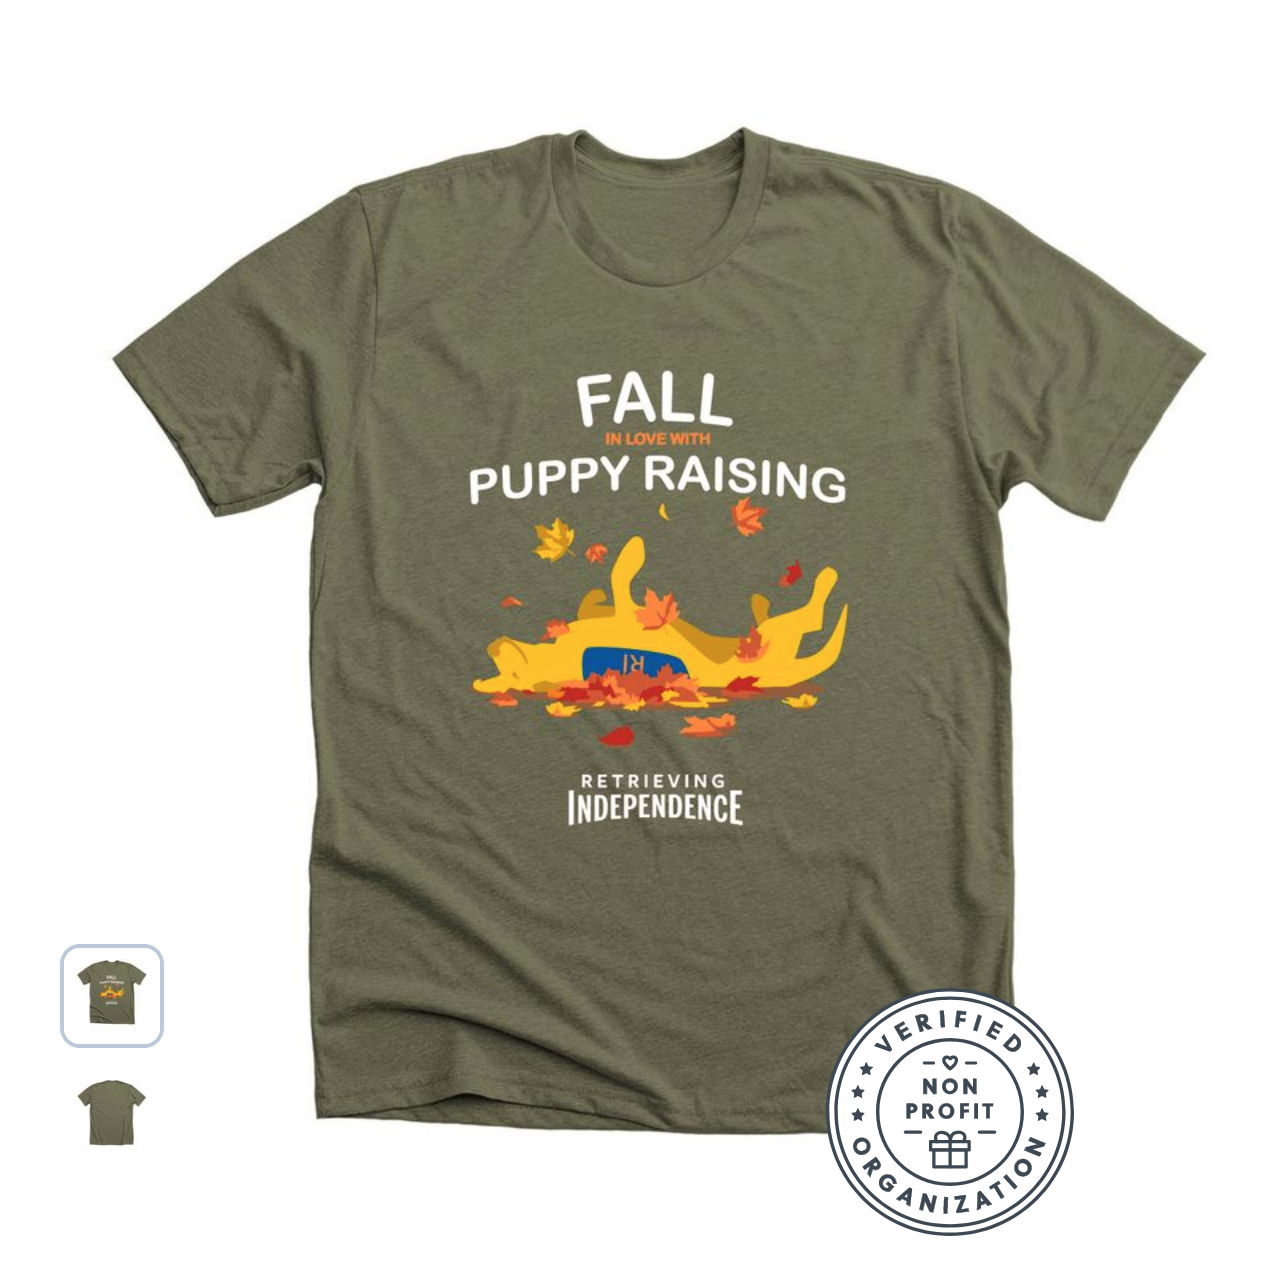 Fall in Love with Puppy Raising T-shirt in Olive